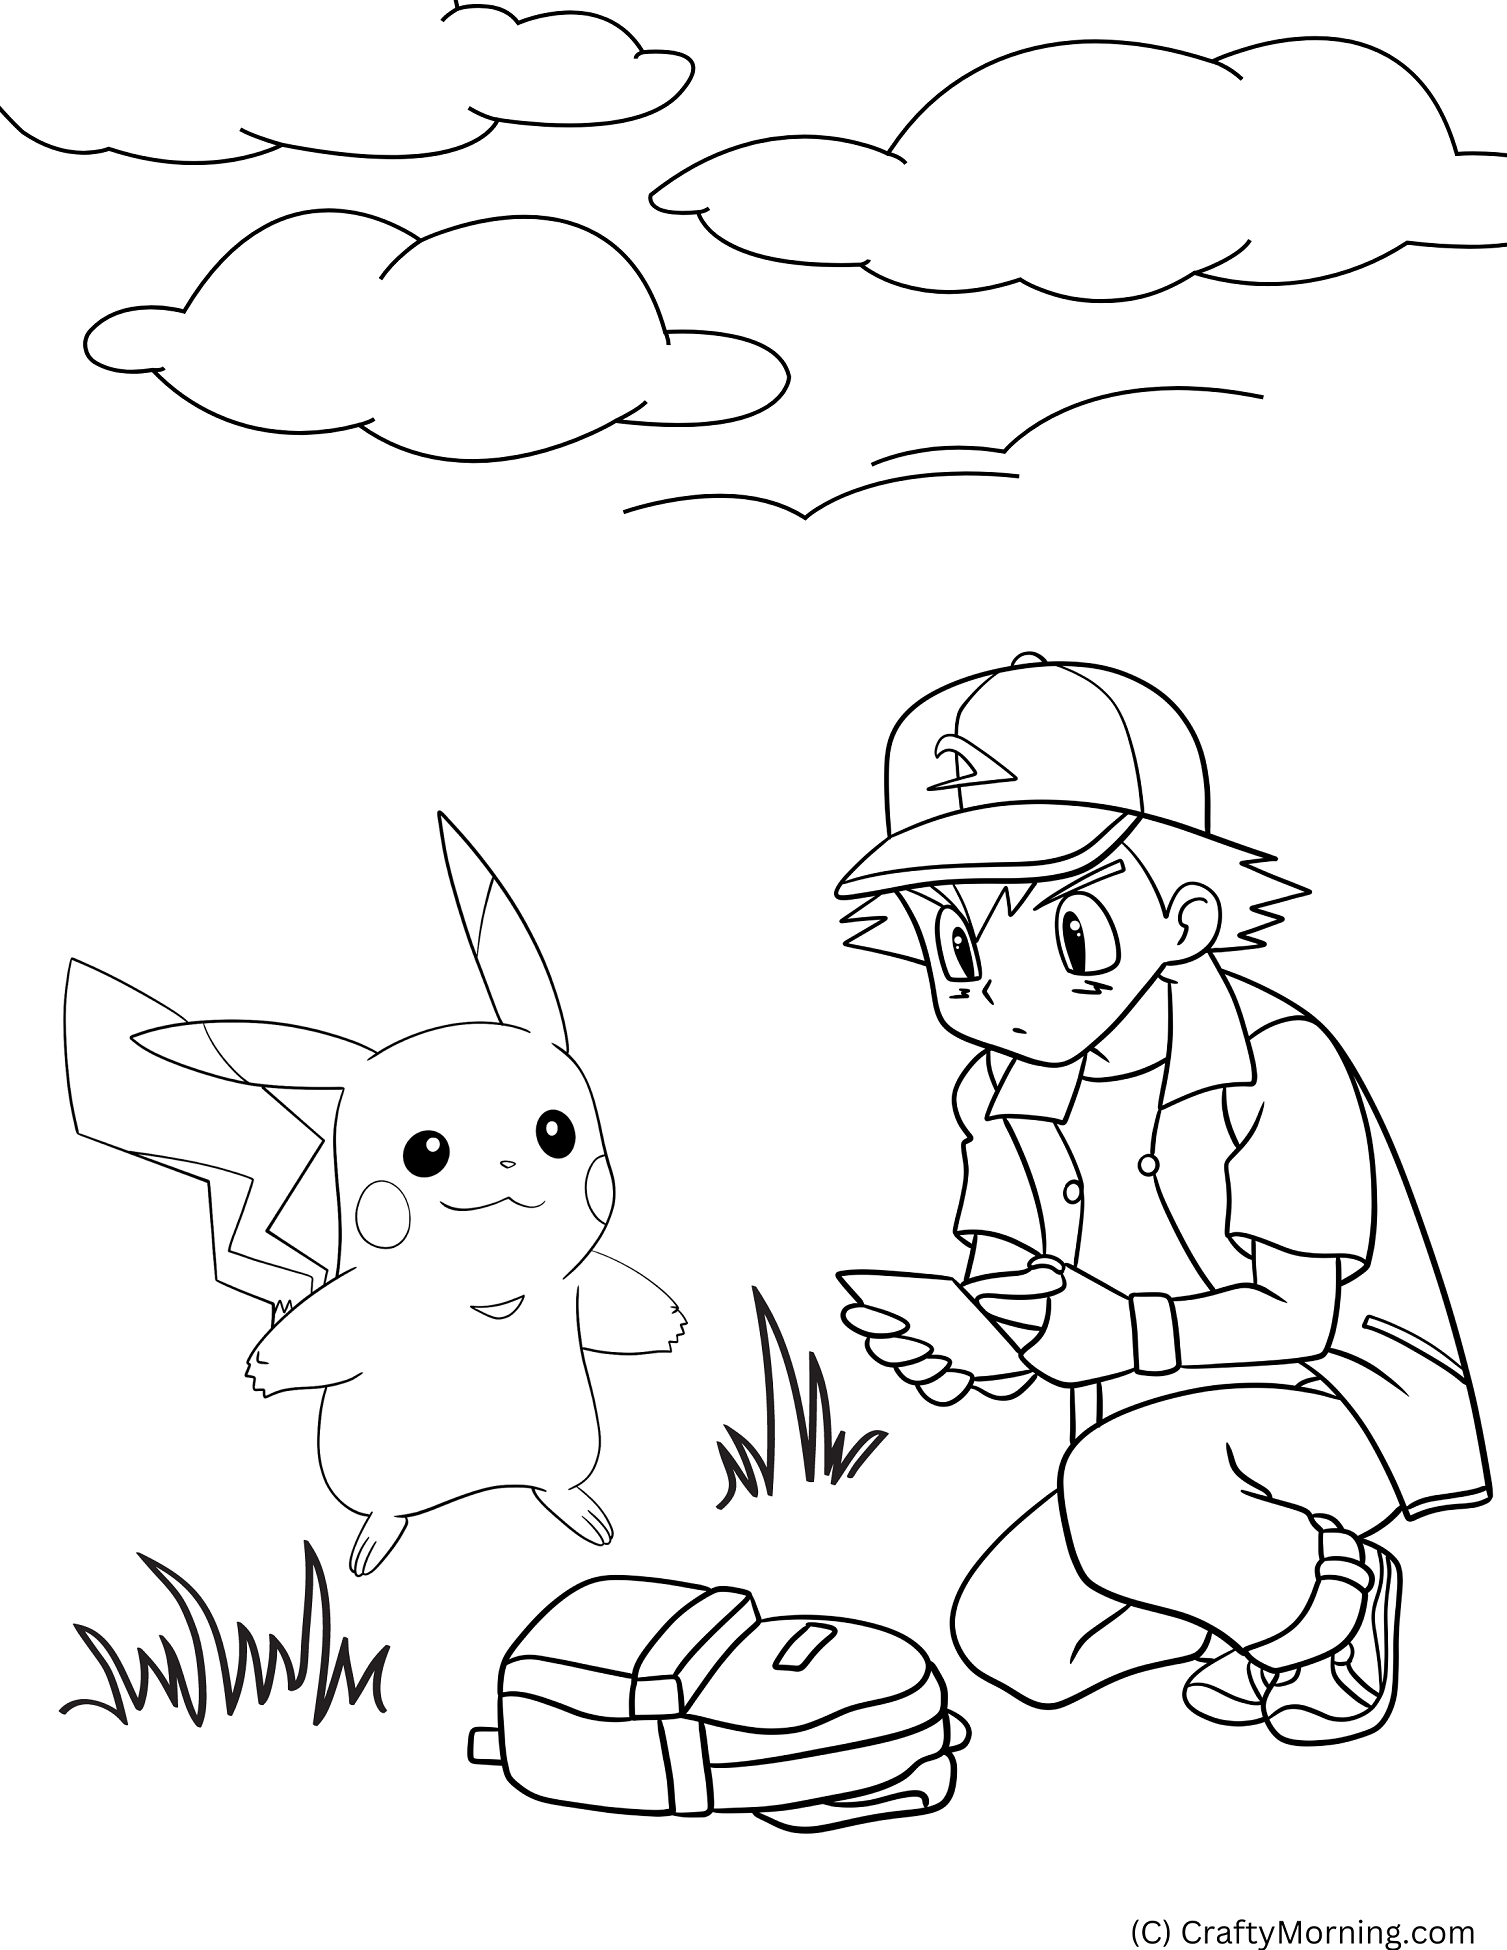 pokemon free printables coloring pages